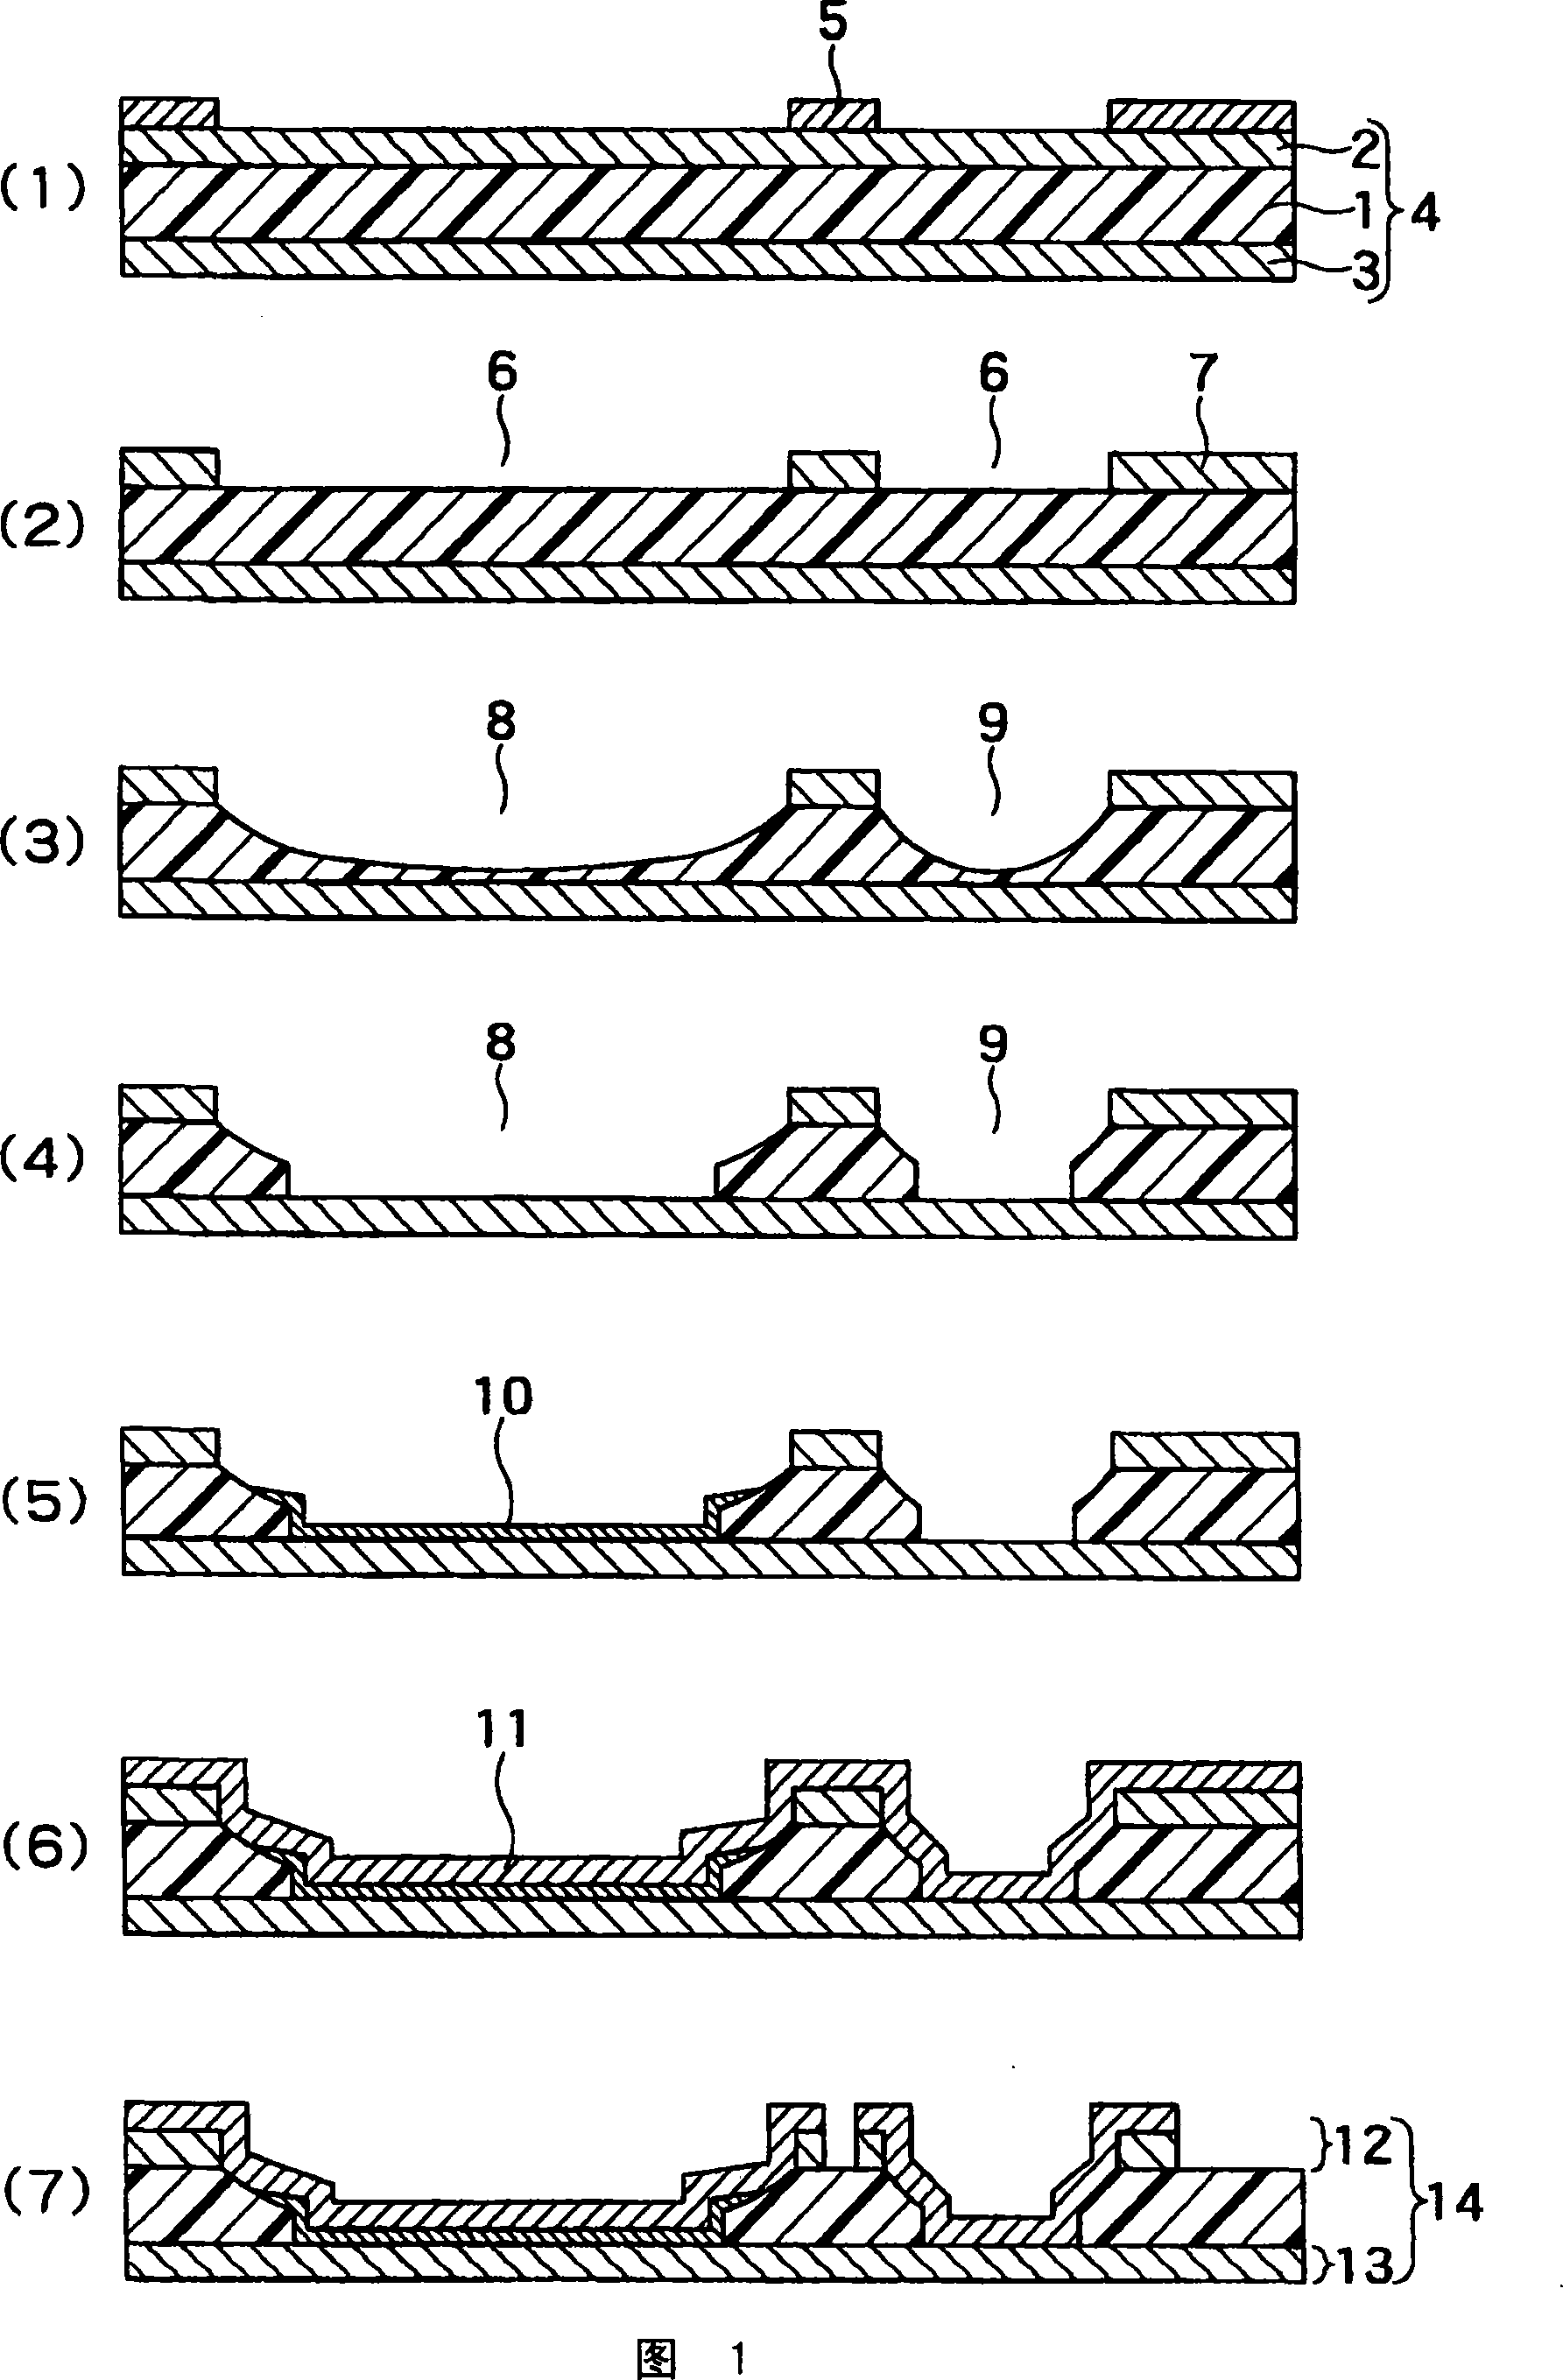 Method for manufacturing printed circuit board with built-in capacitor